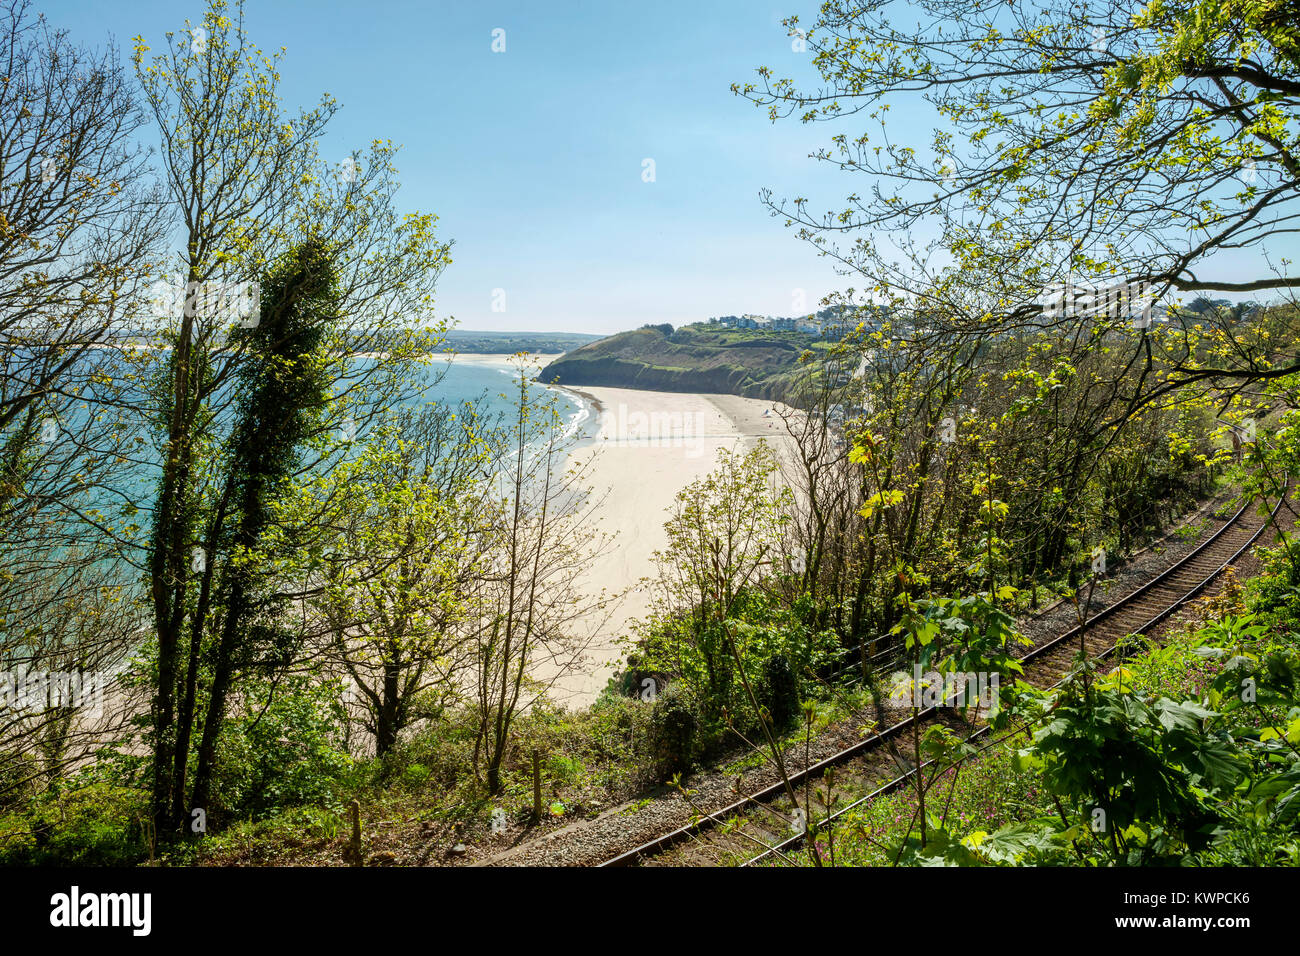 View overlooking Carbis bay in Cornwall and the railway line from the St Ives Bay Line. Stock Photo